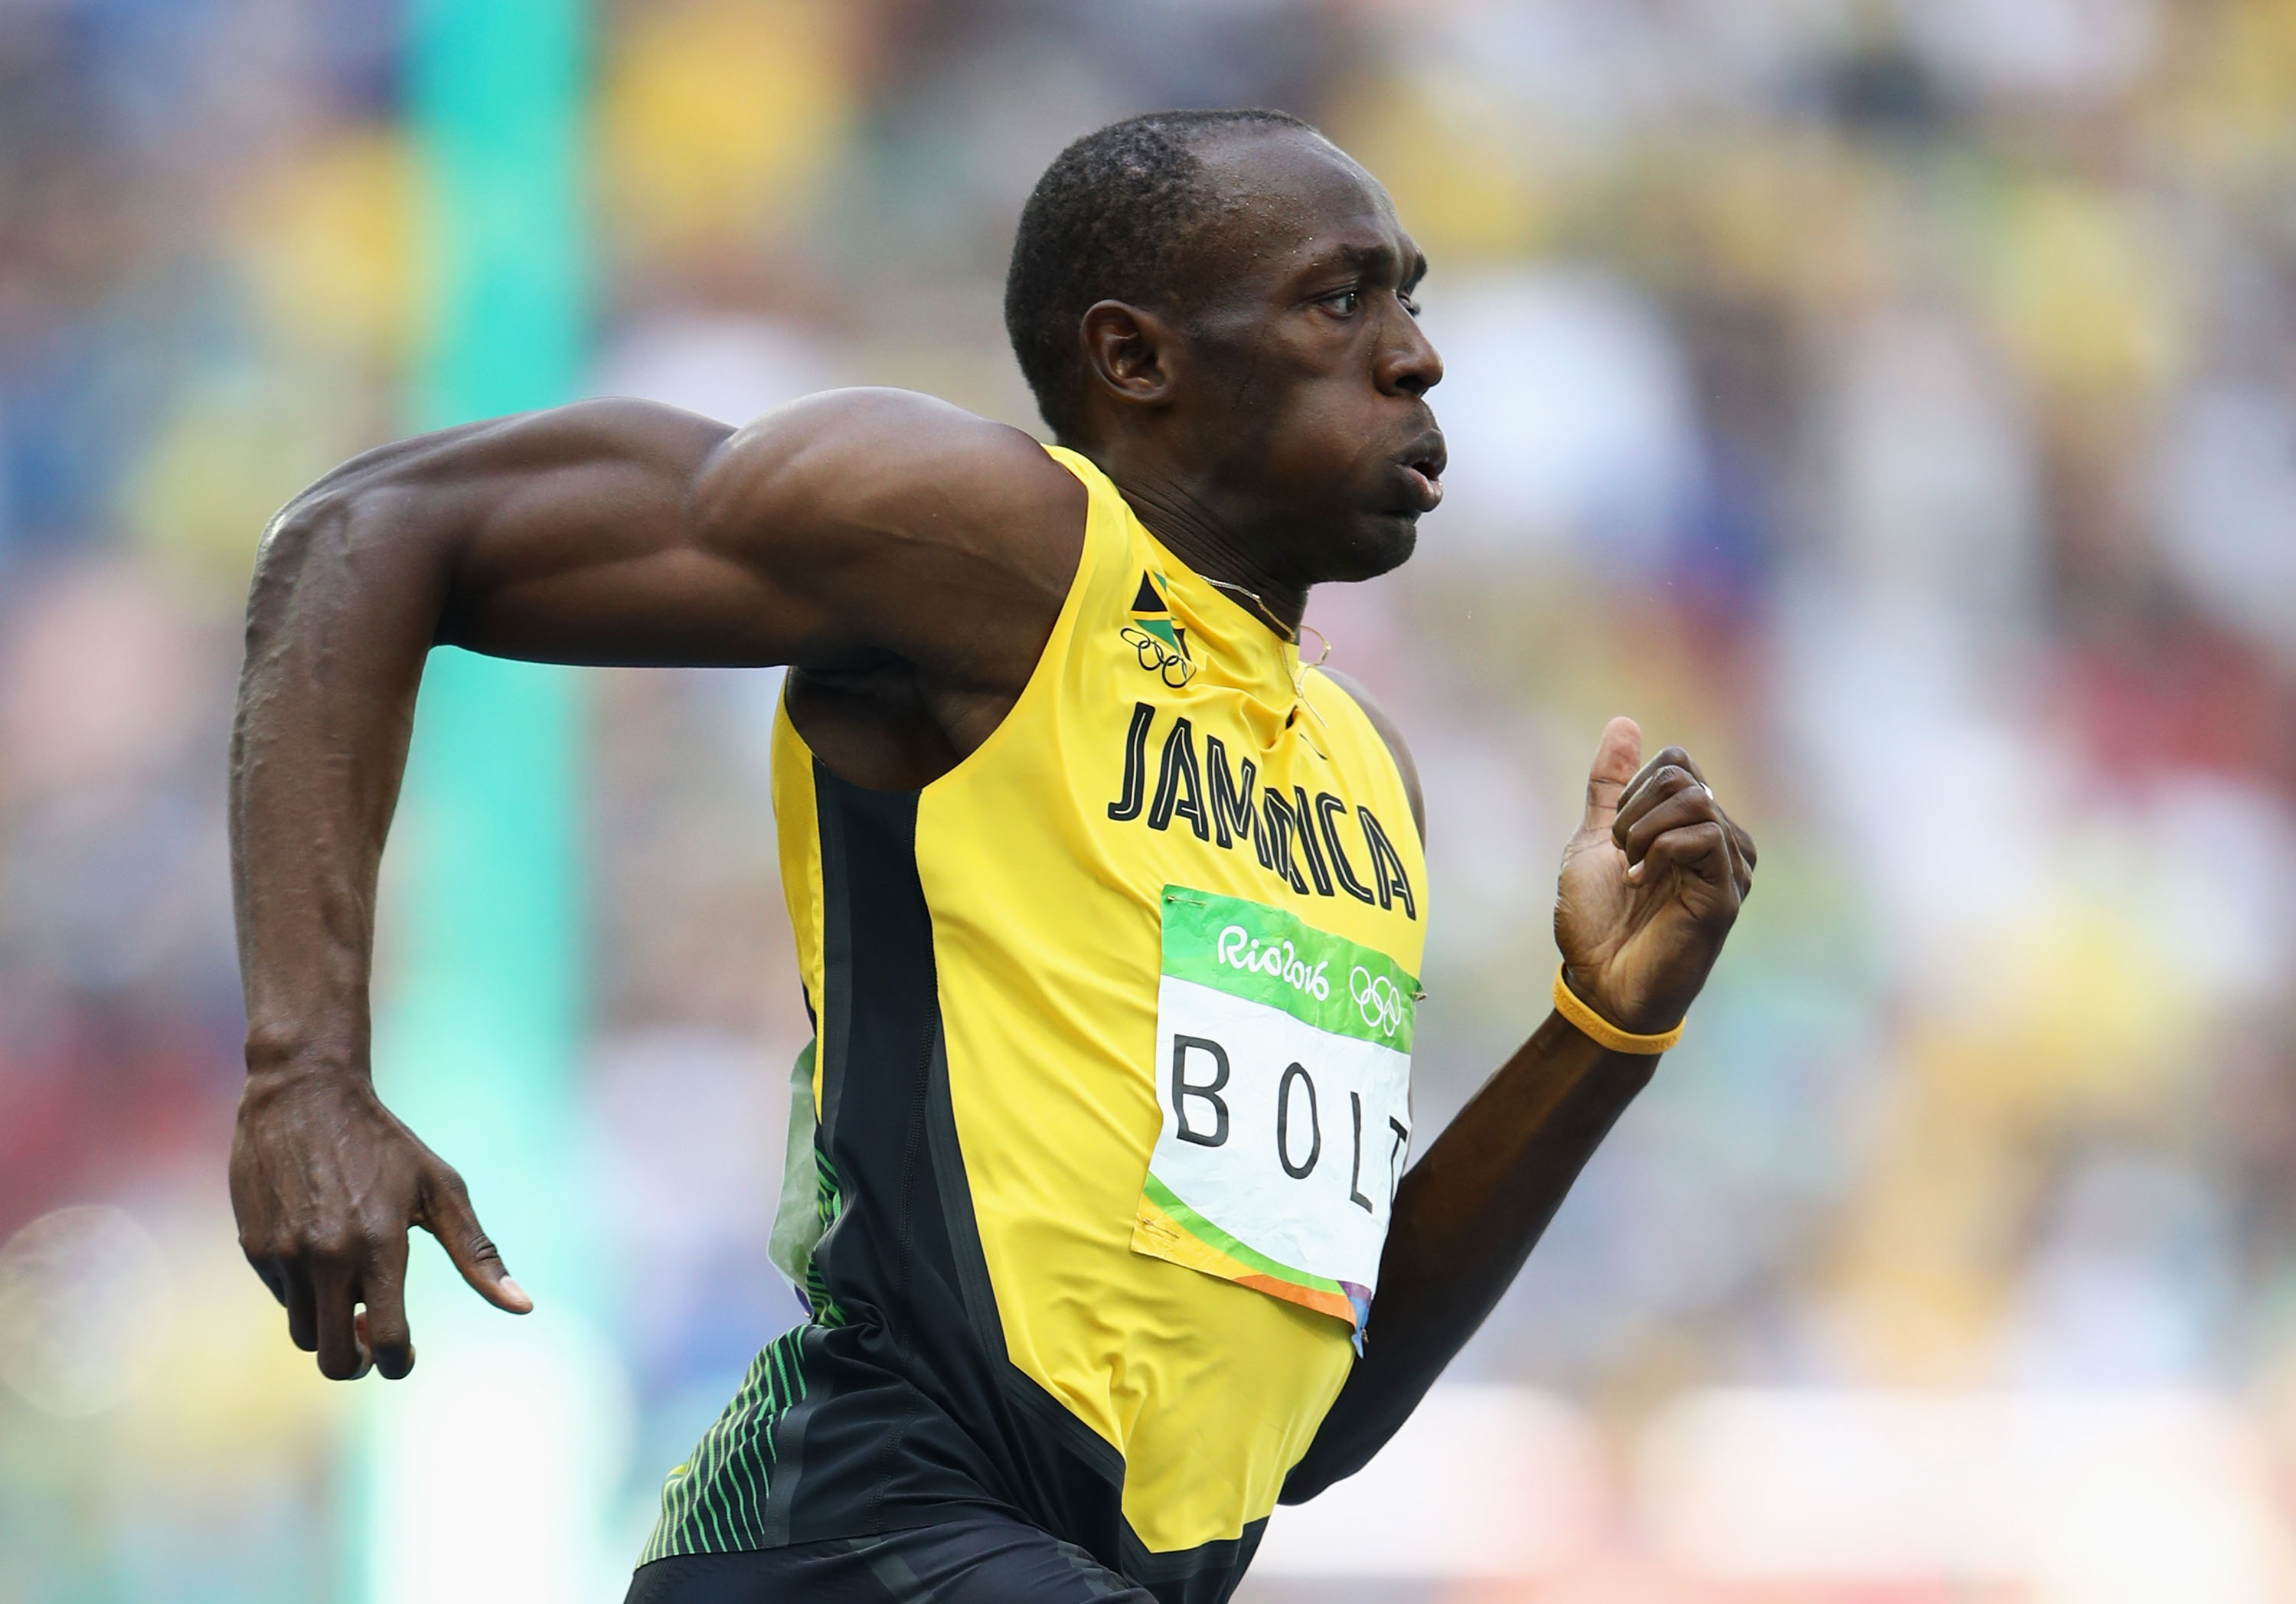 Olympic Men’s 200m Final Live Stream How to Watch Online